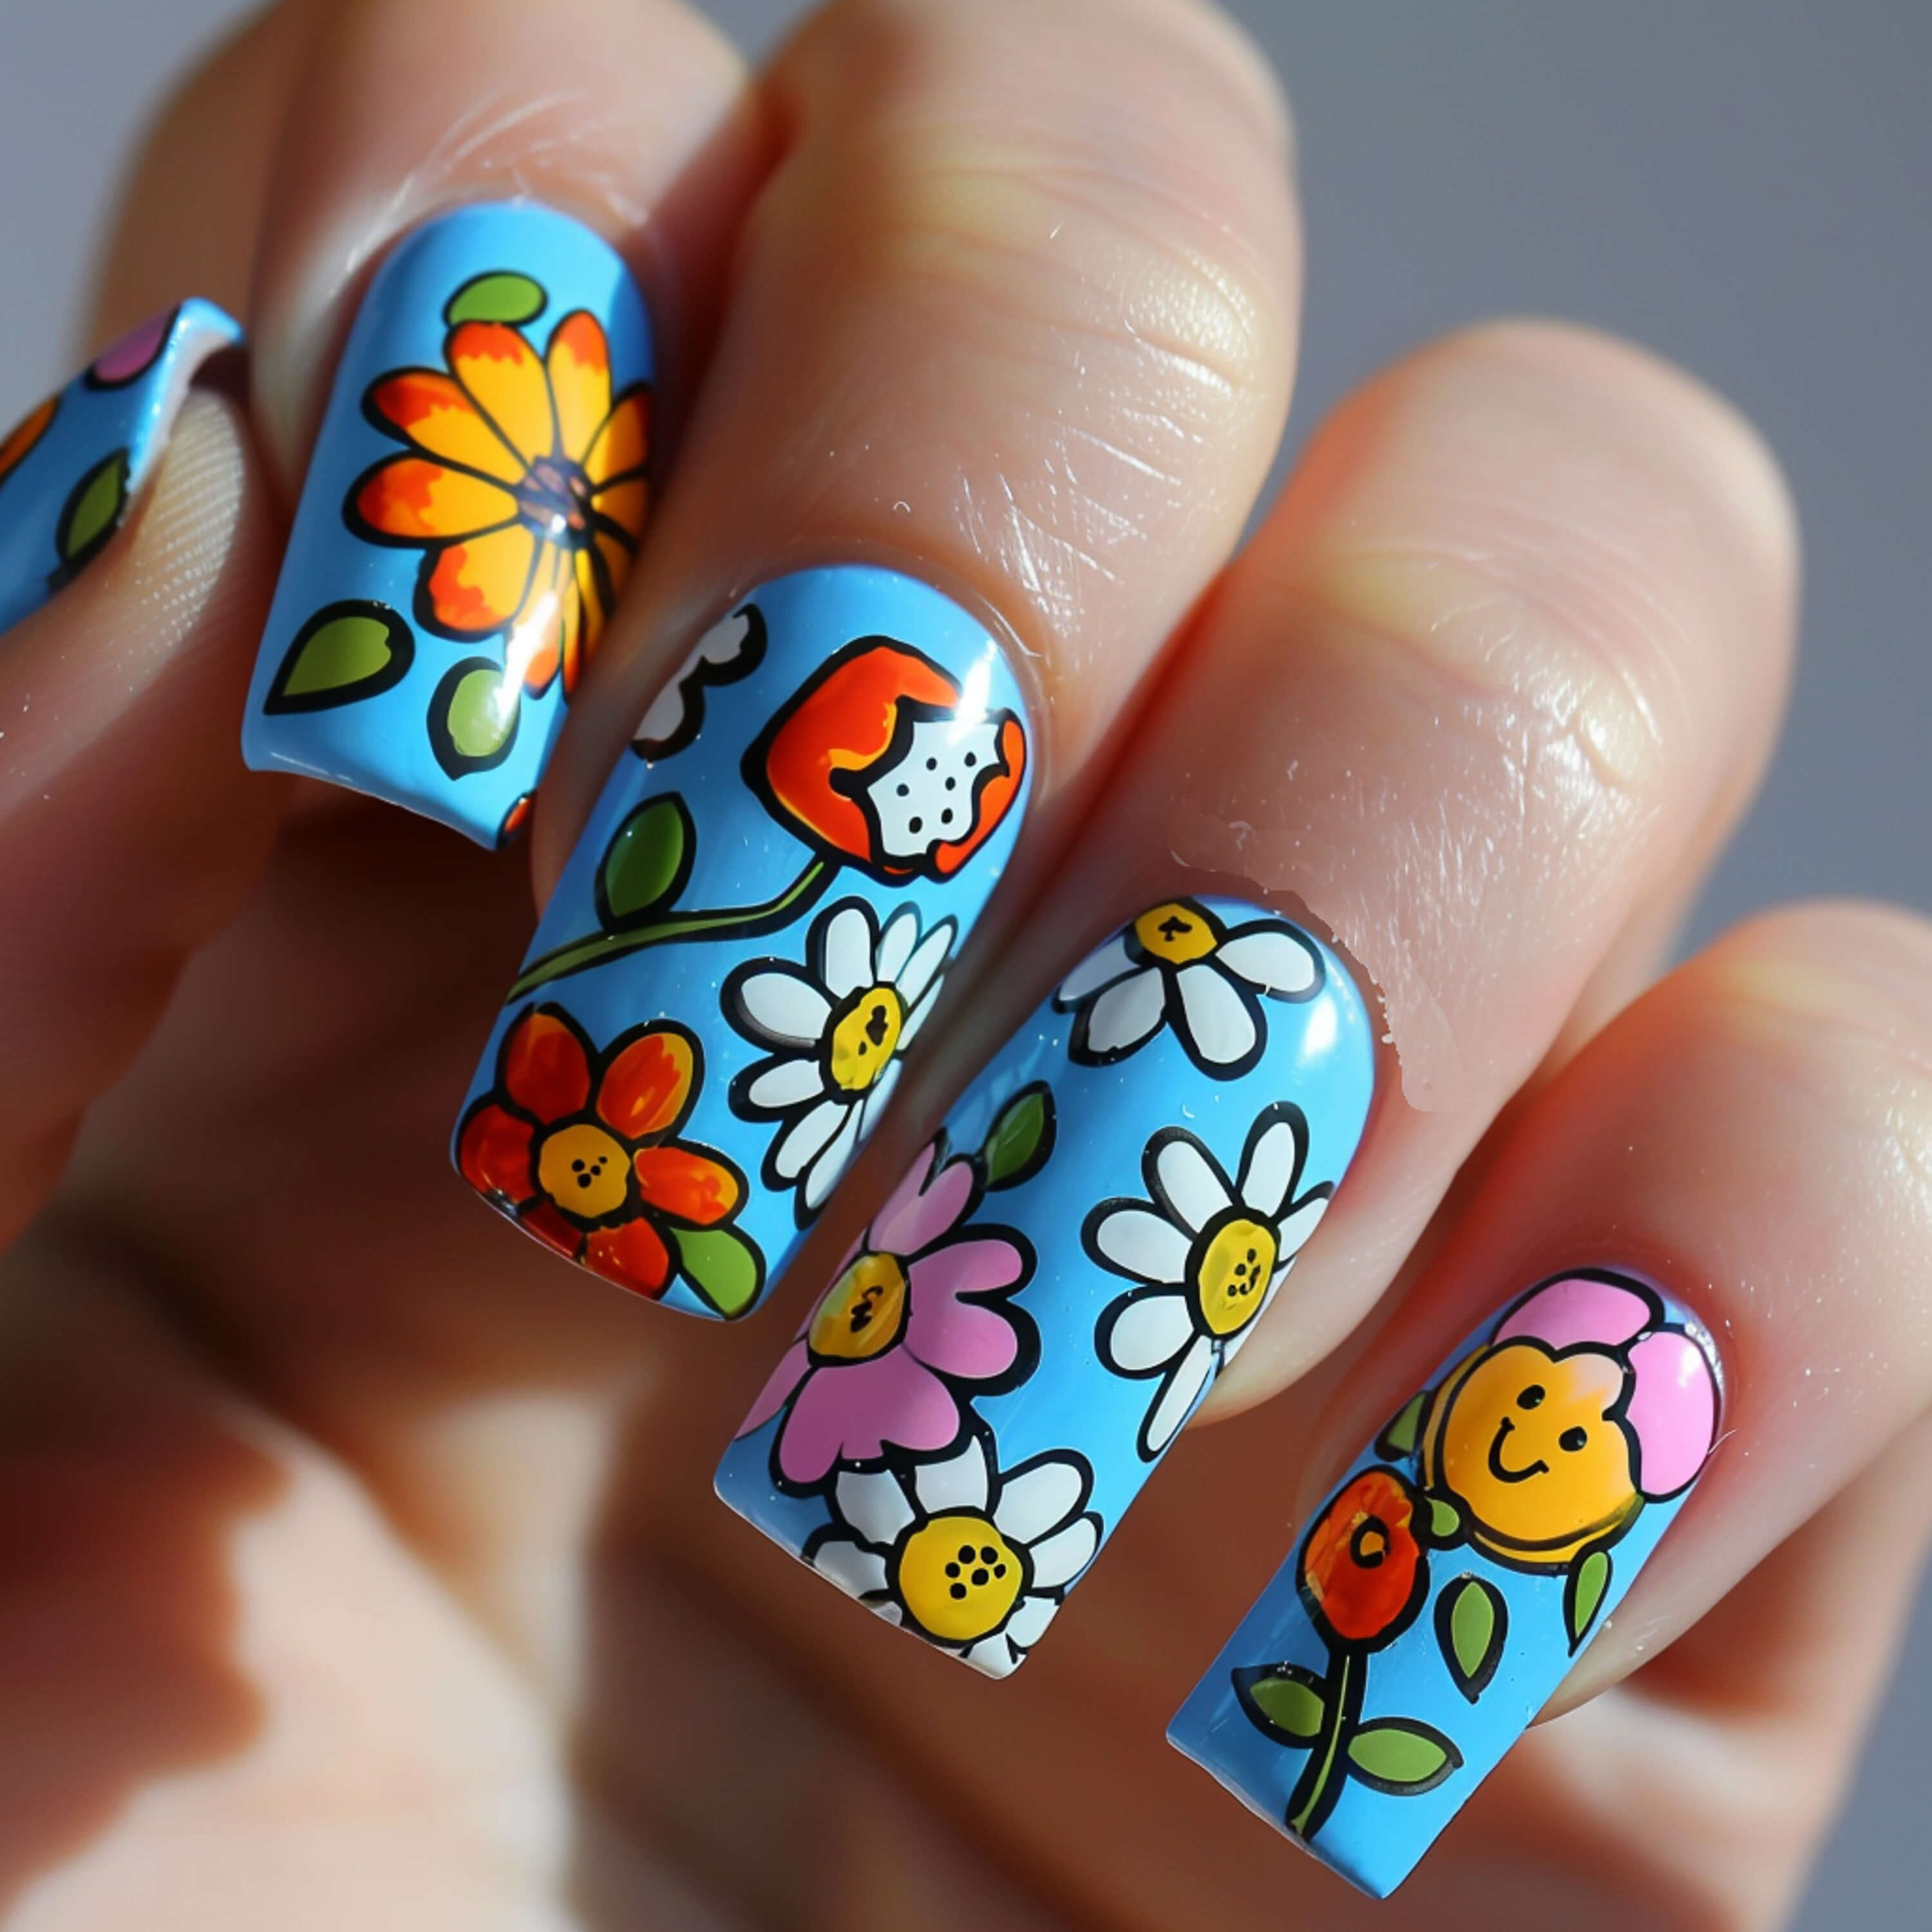 cartoon flowers painted on square shaped nails